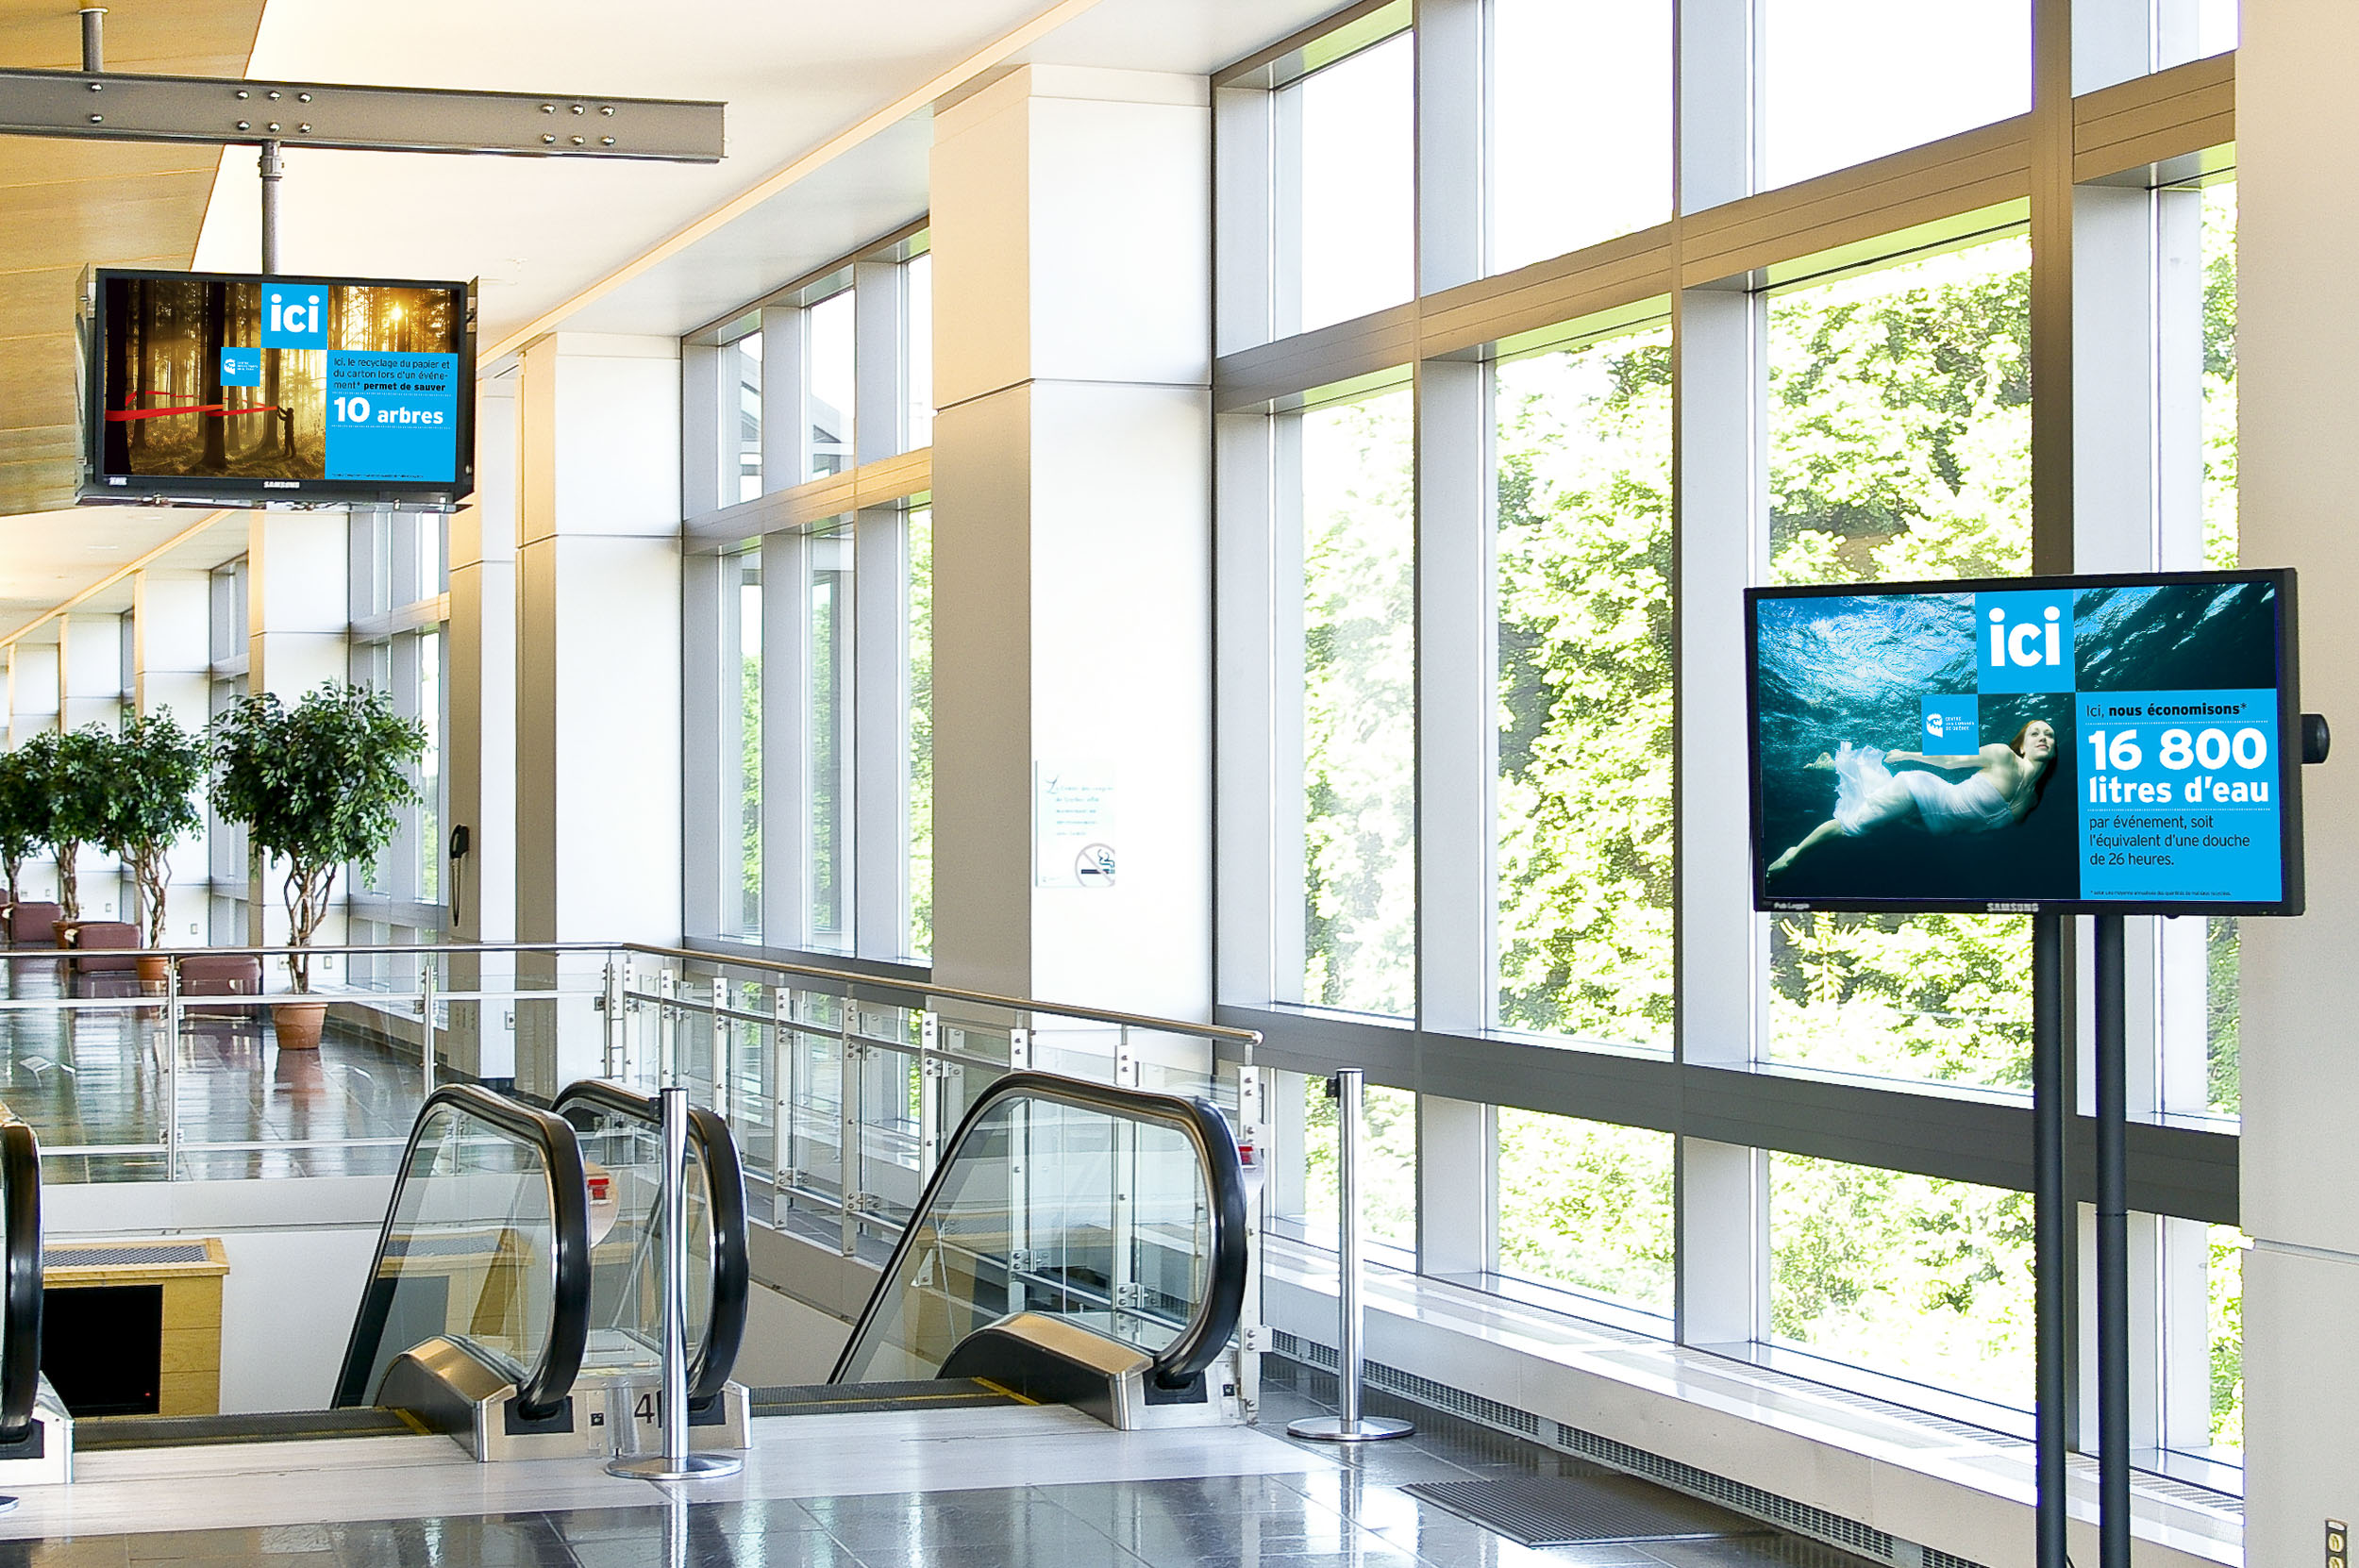 Hallway with large windows and escalator, next to 2 digital signage screens.